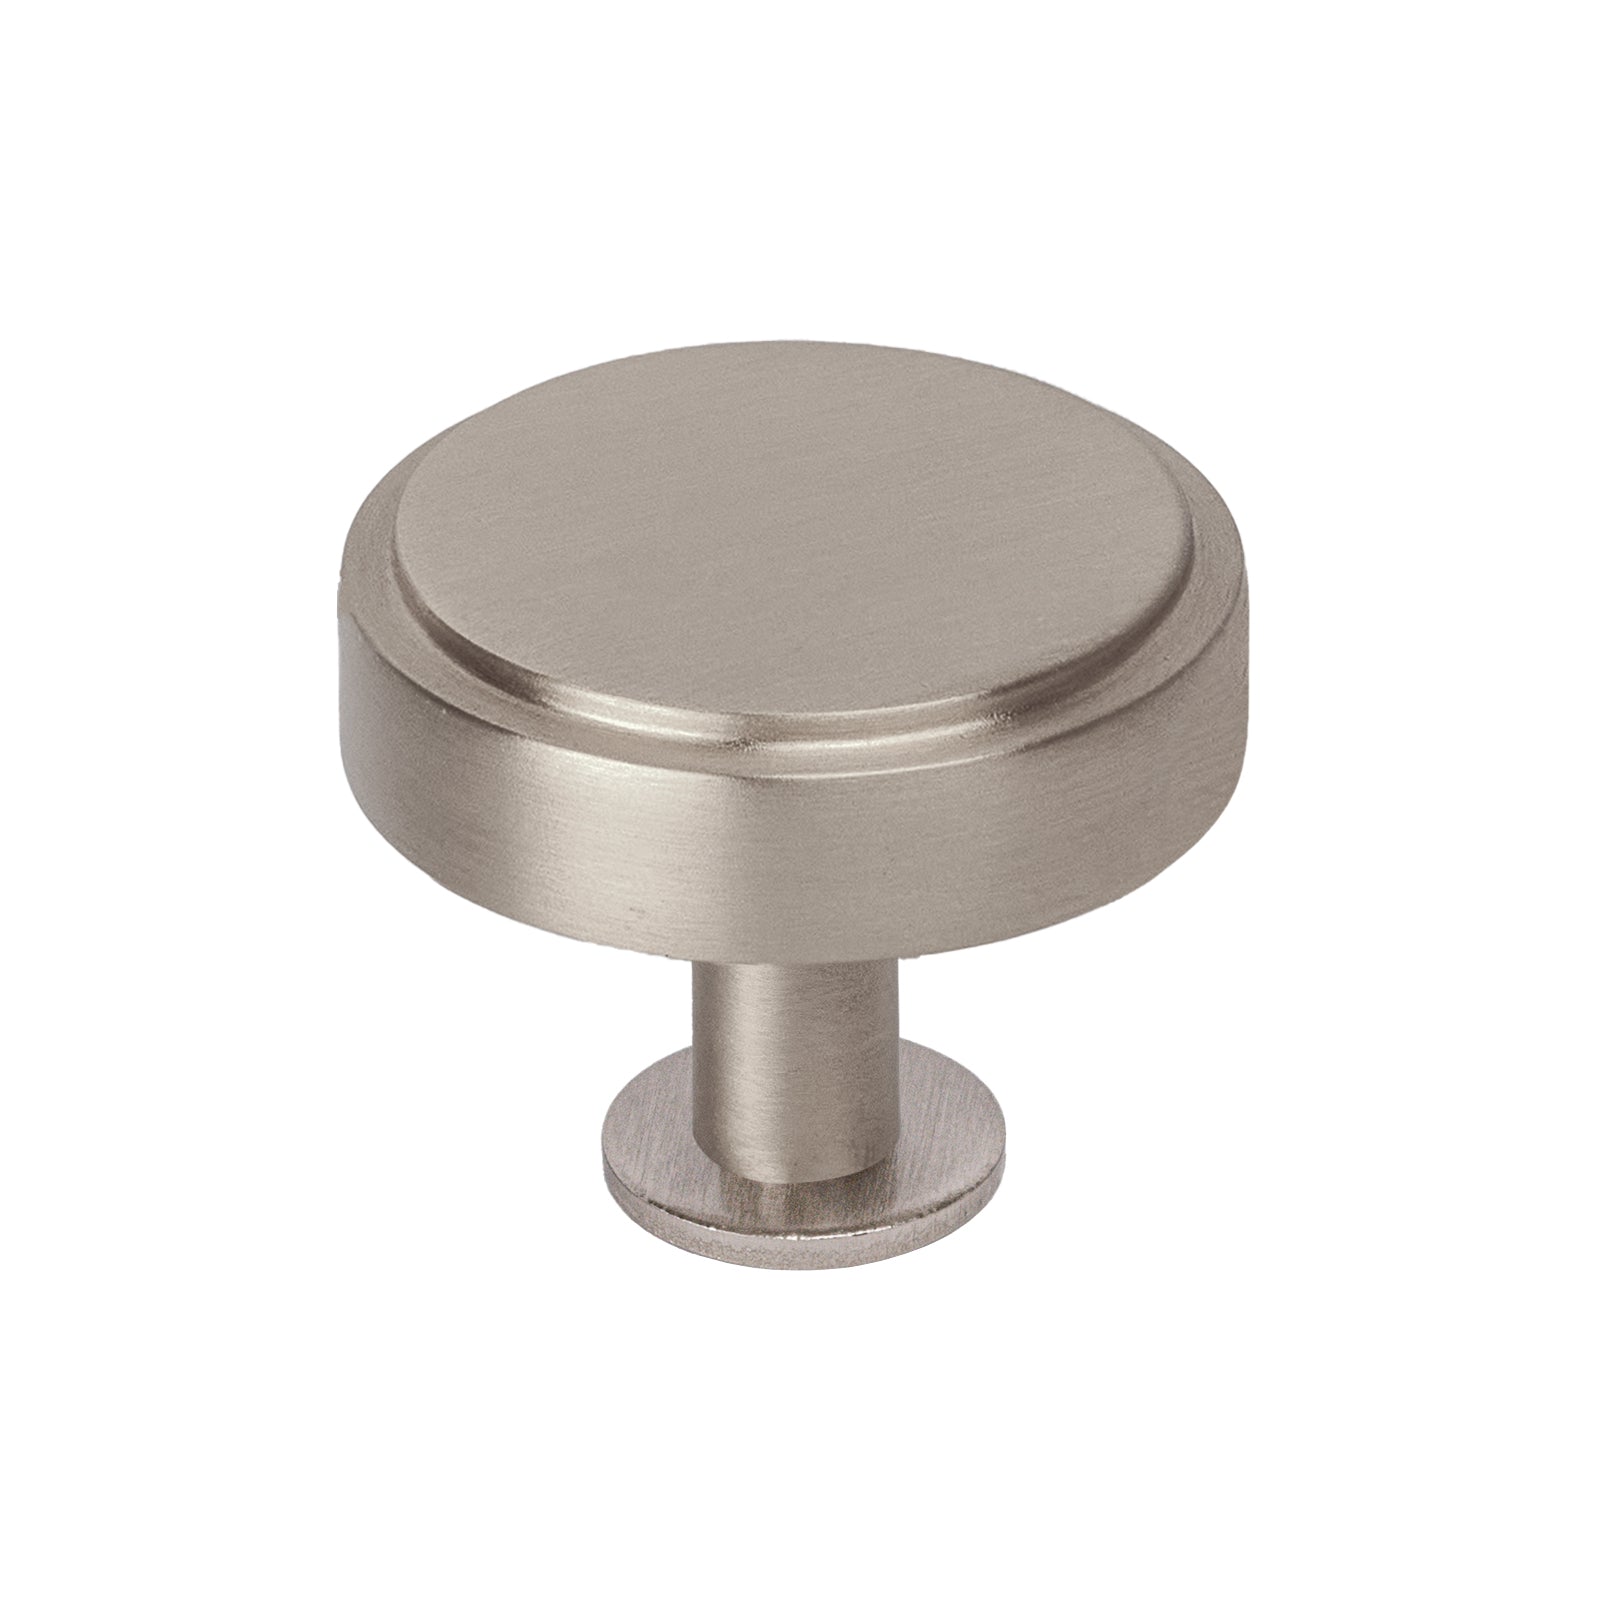 Stepped Disc Cabinet Knobs On Rose